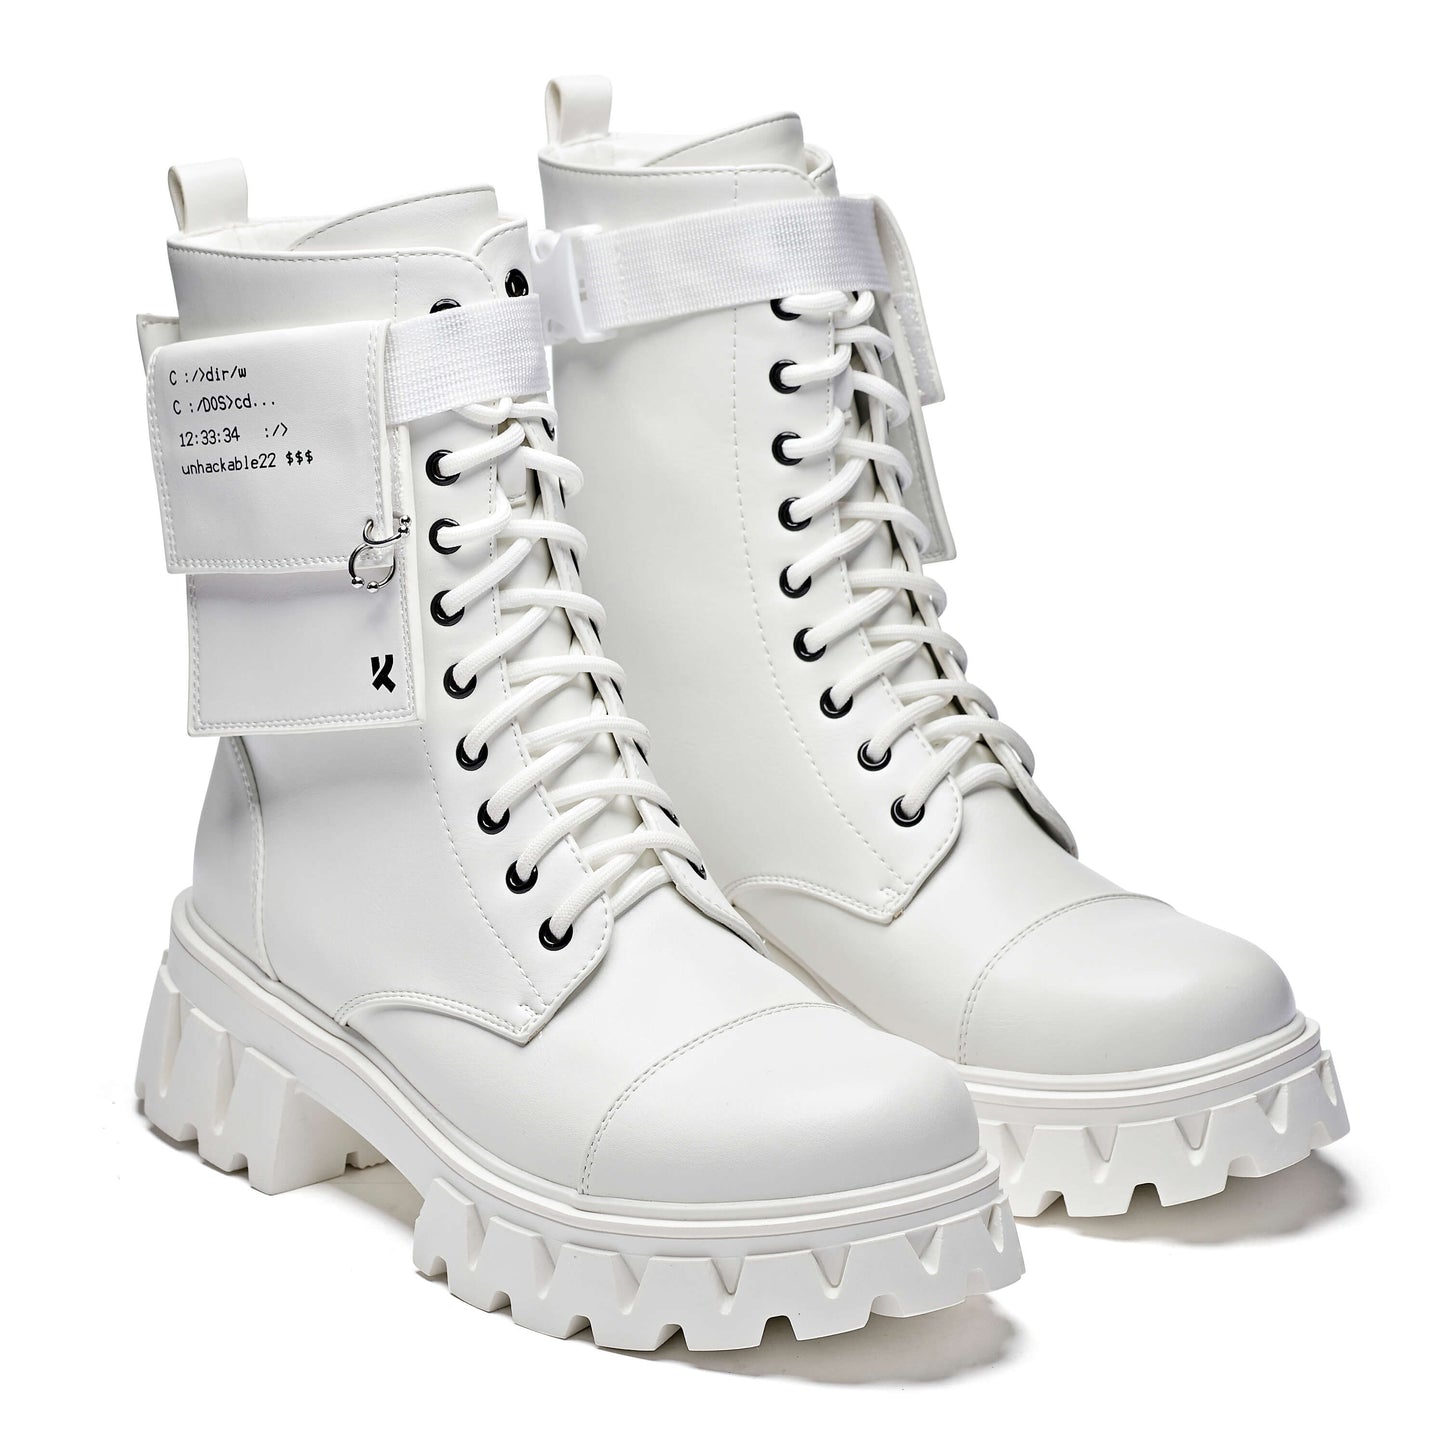 Banshee White Boots - Ankle Boots - KOI Footwear - White - Three-Quarter View